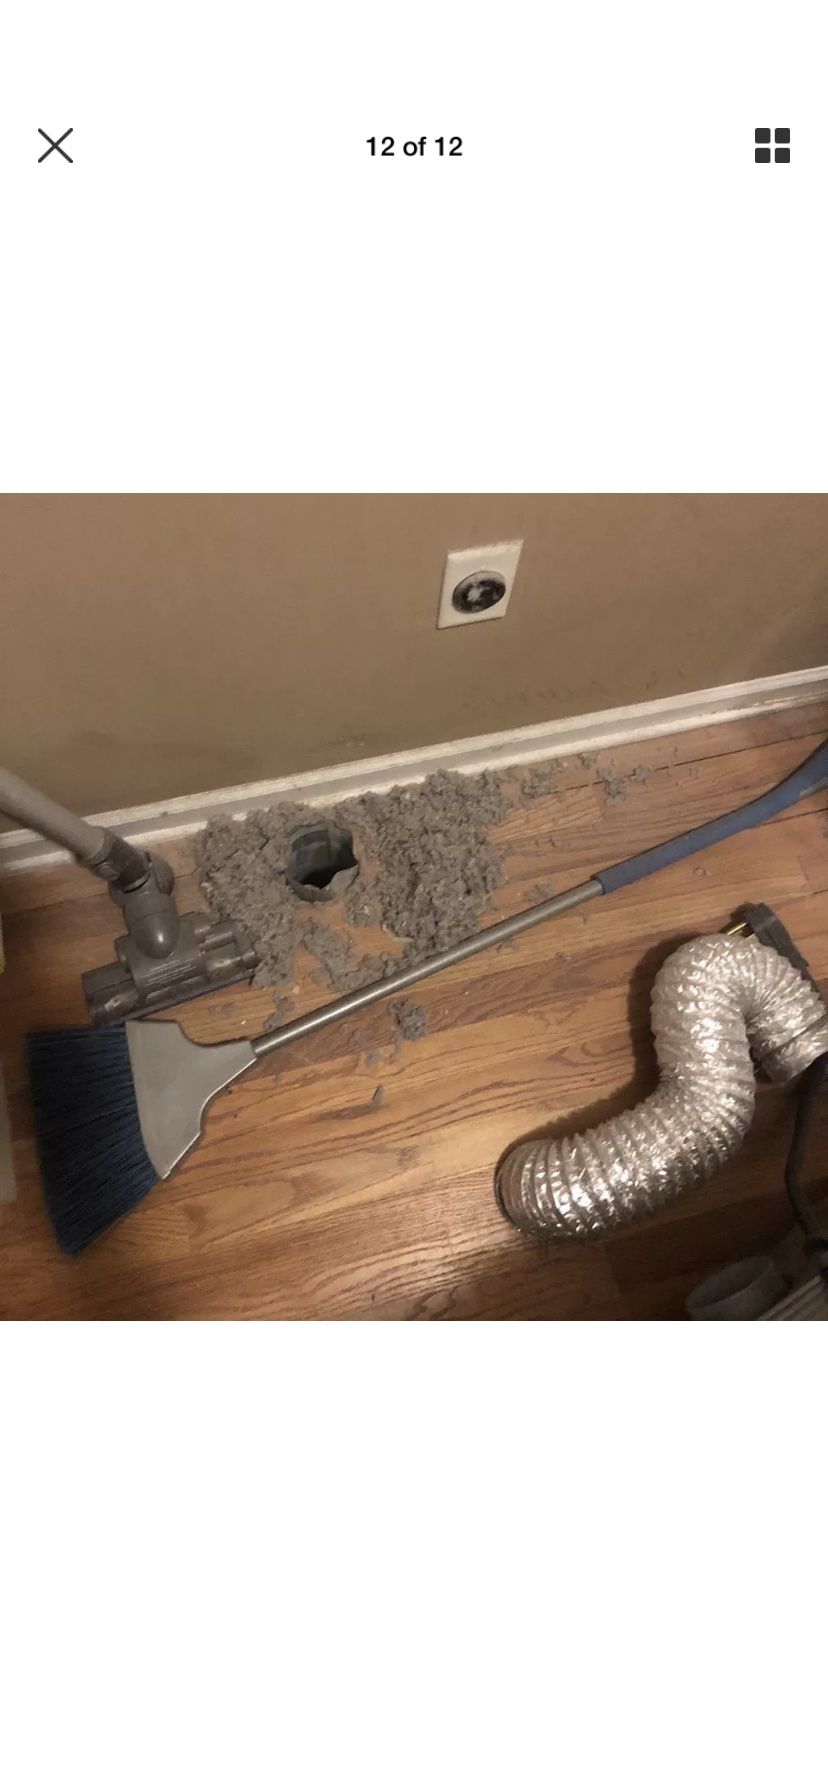 Dryer vent cleaning $65